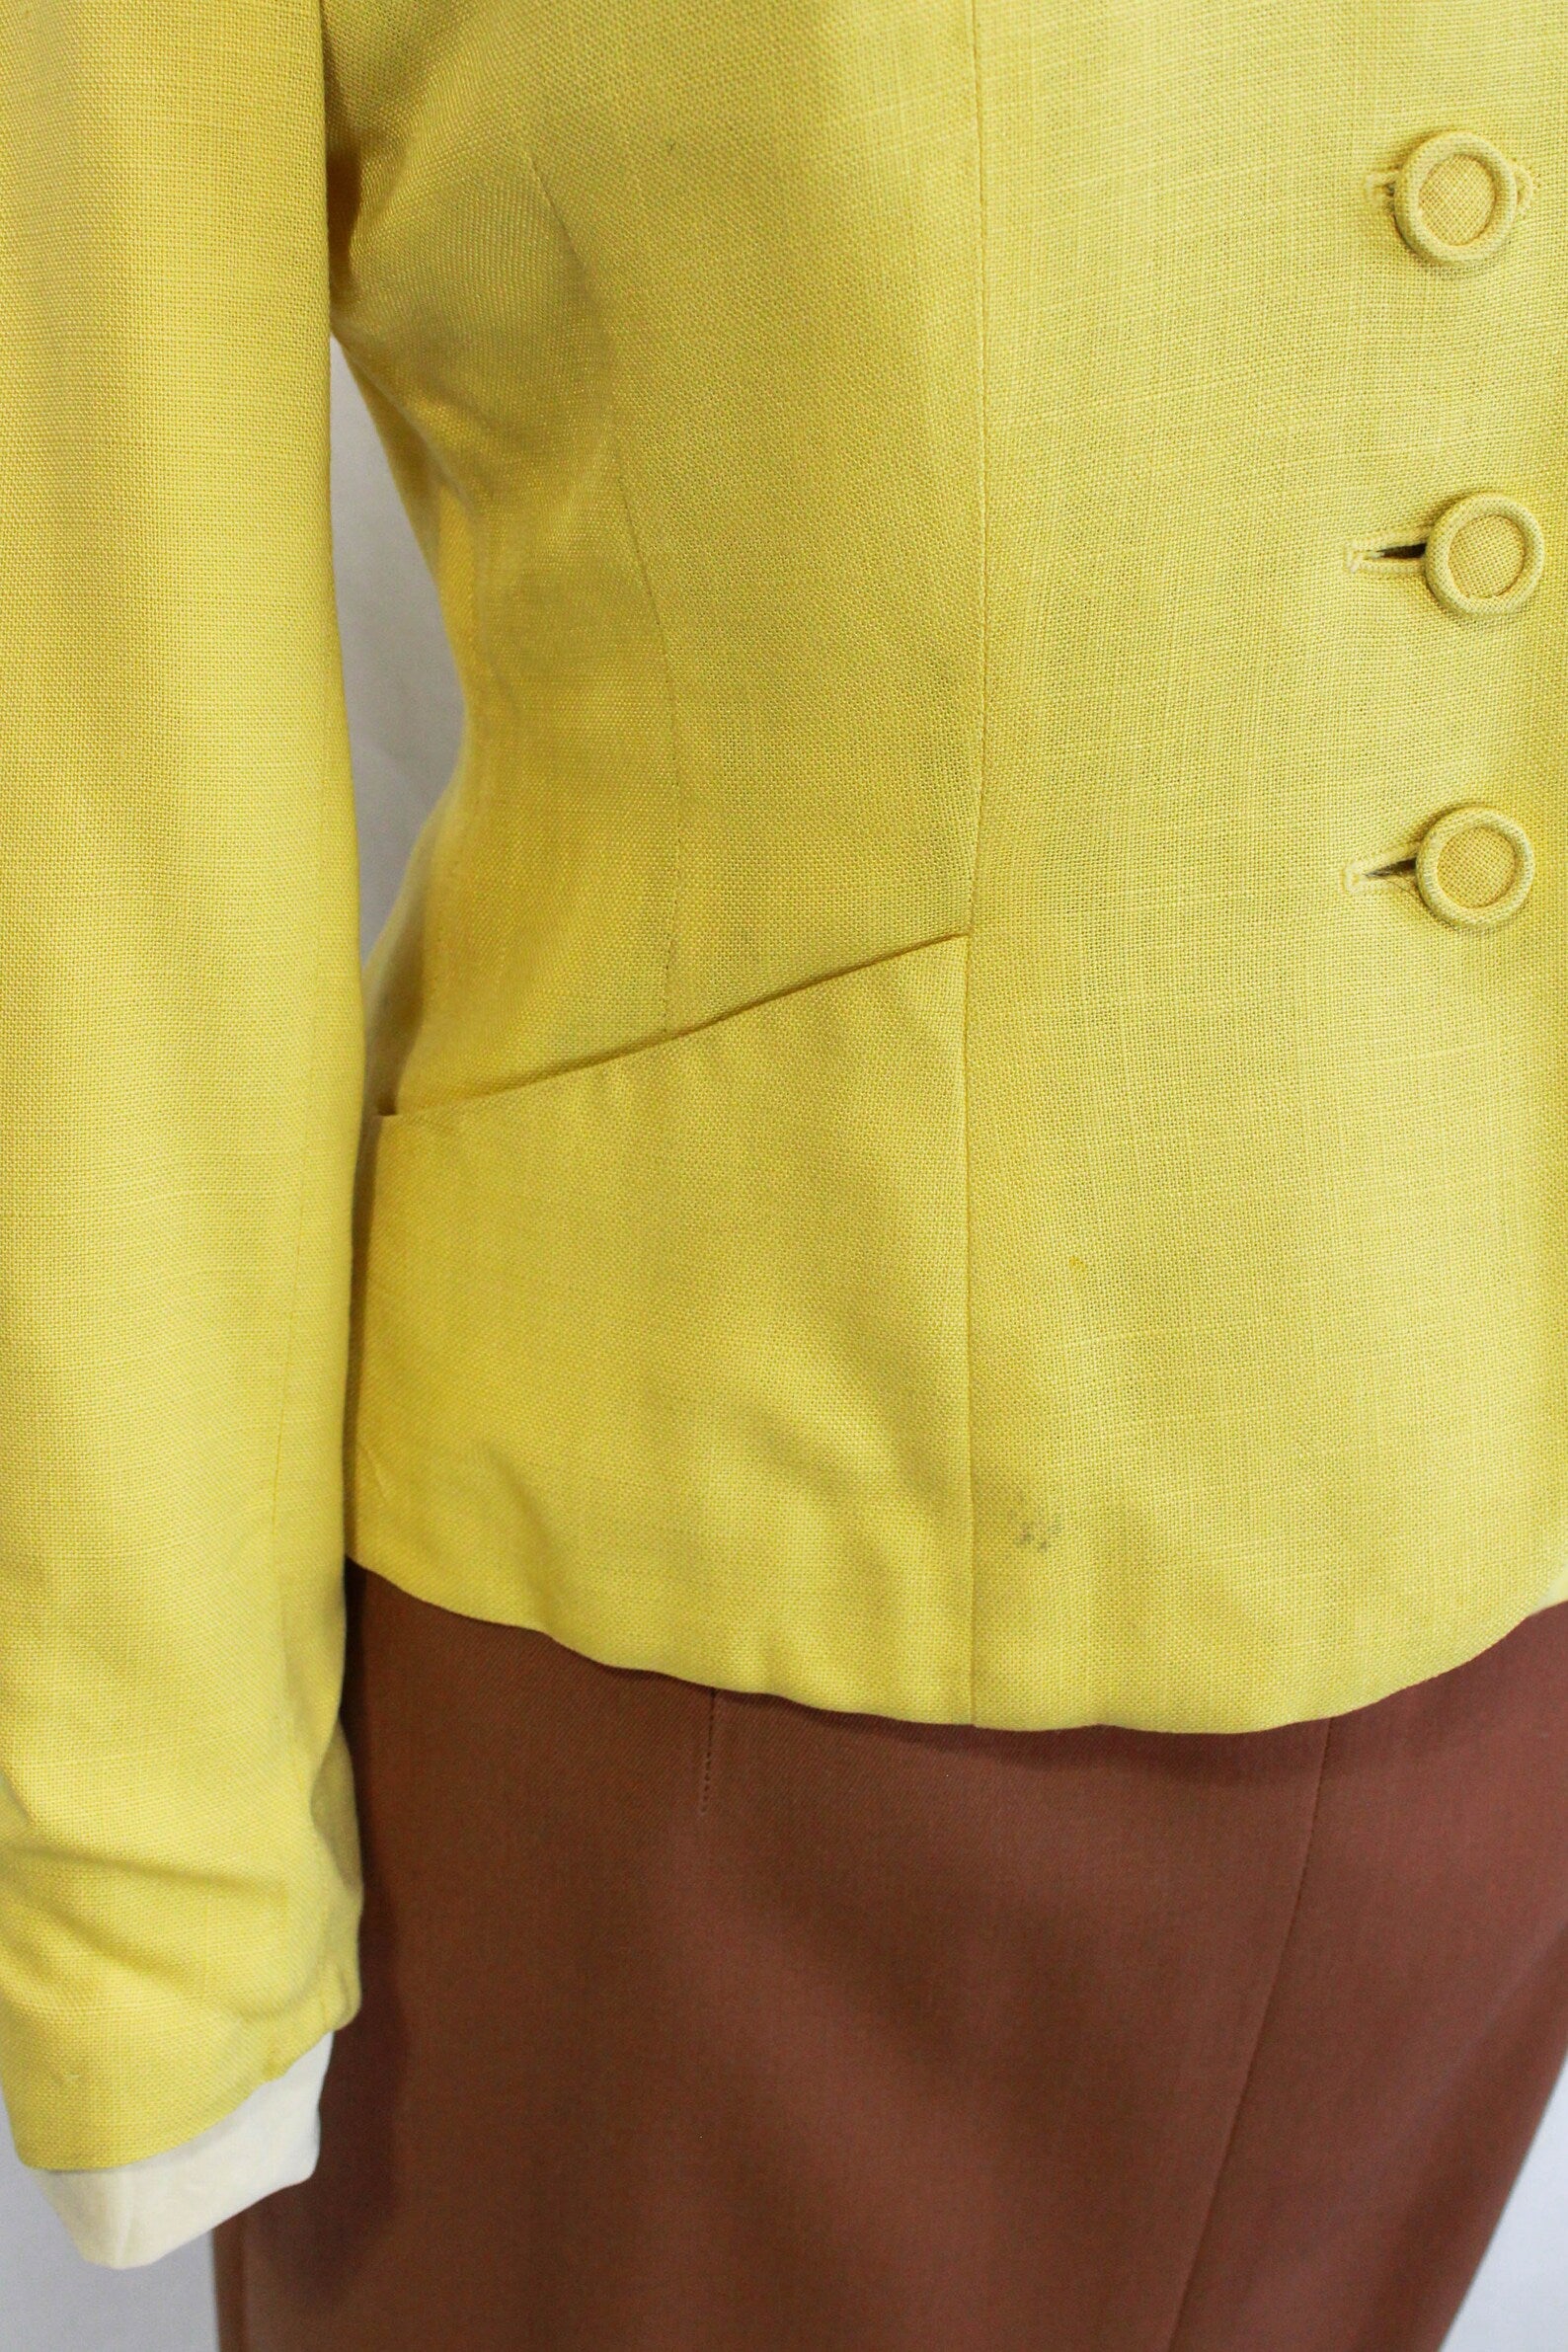 1940s/50s Yellow and Brown Contrast Collar Blazer Jacket, Small, Pockets, Covered Buttons, Vintage Womens Blazer